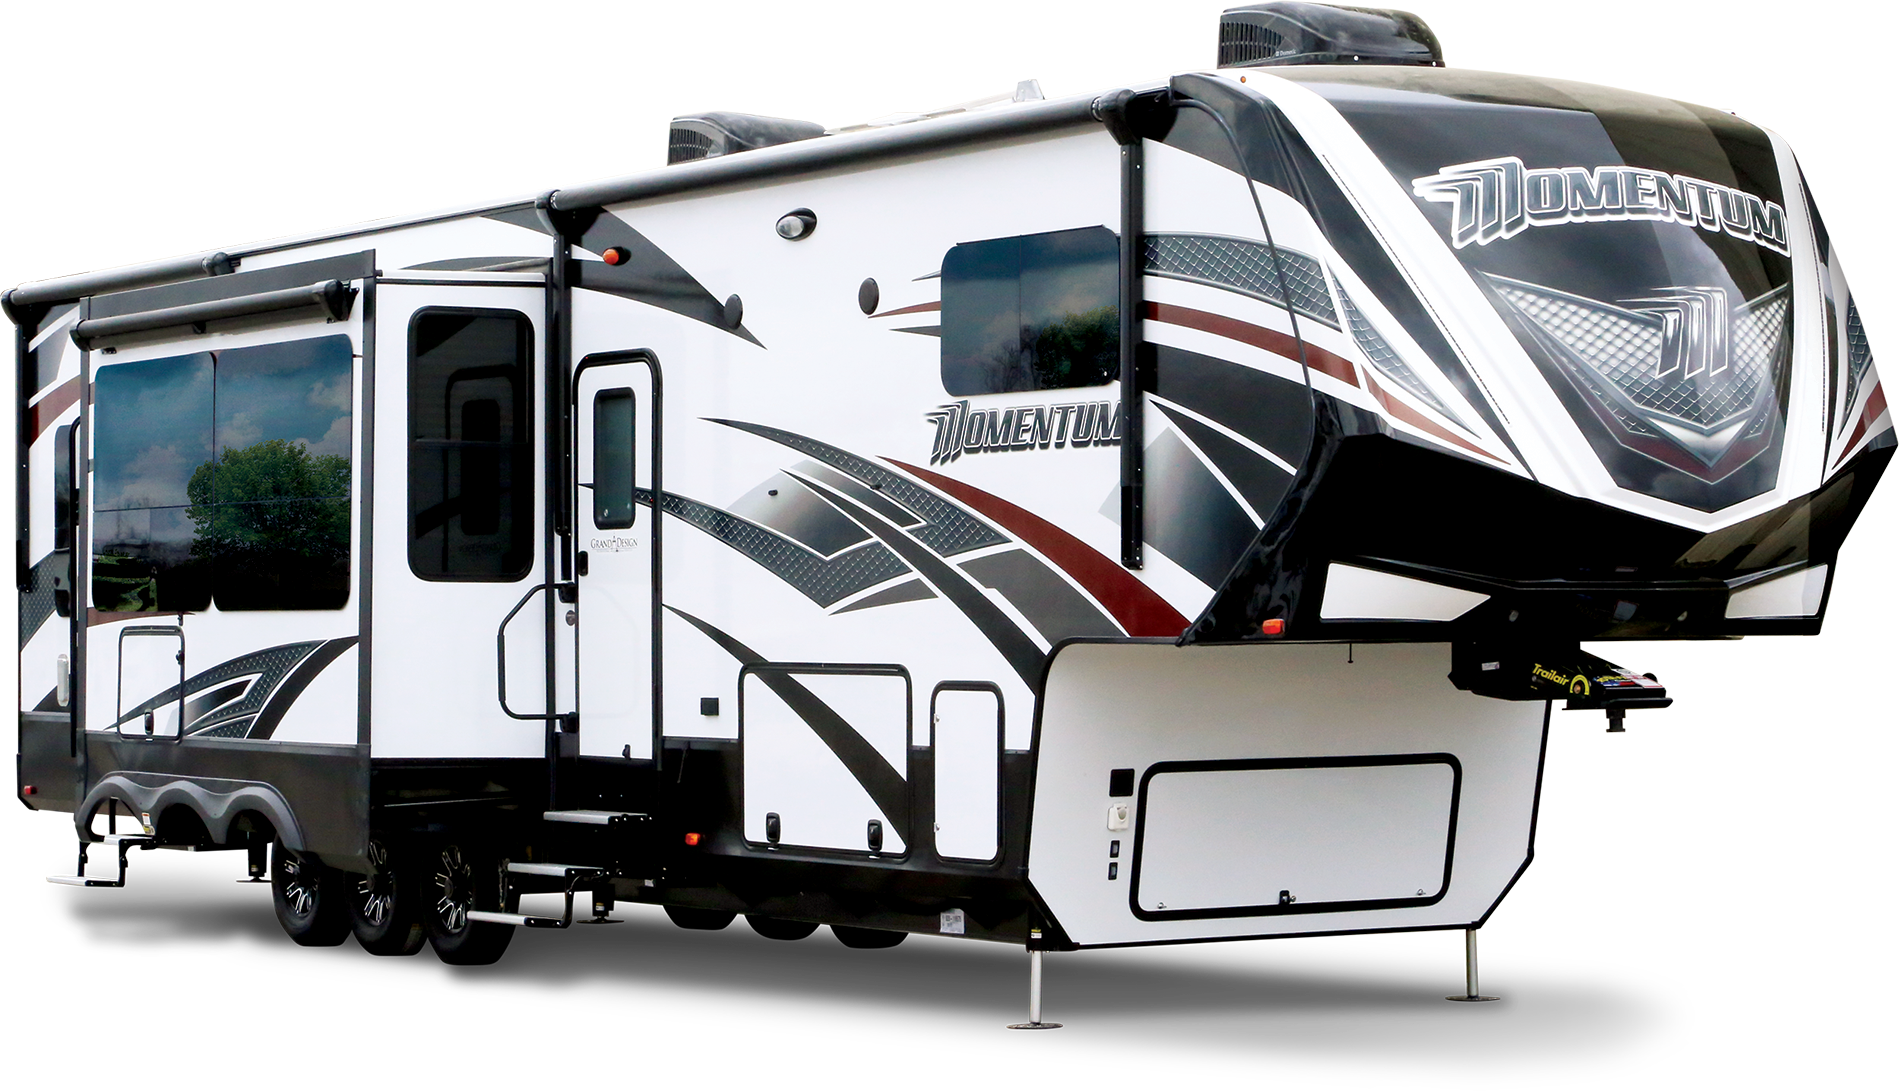 Buy Toy Haulers at 1st Choice Trailers & Campers